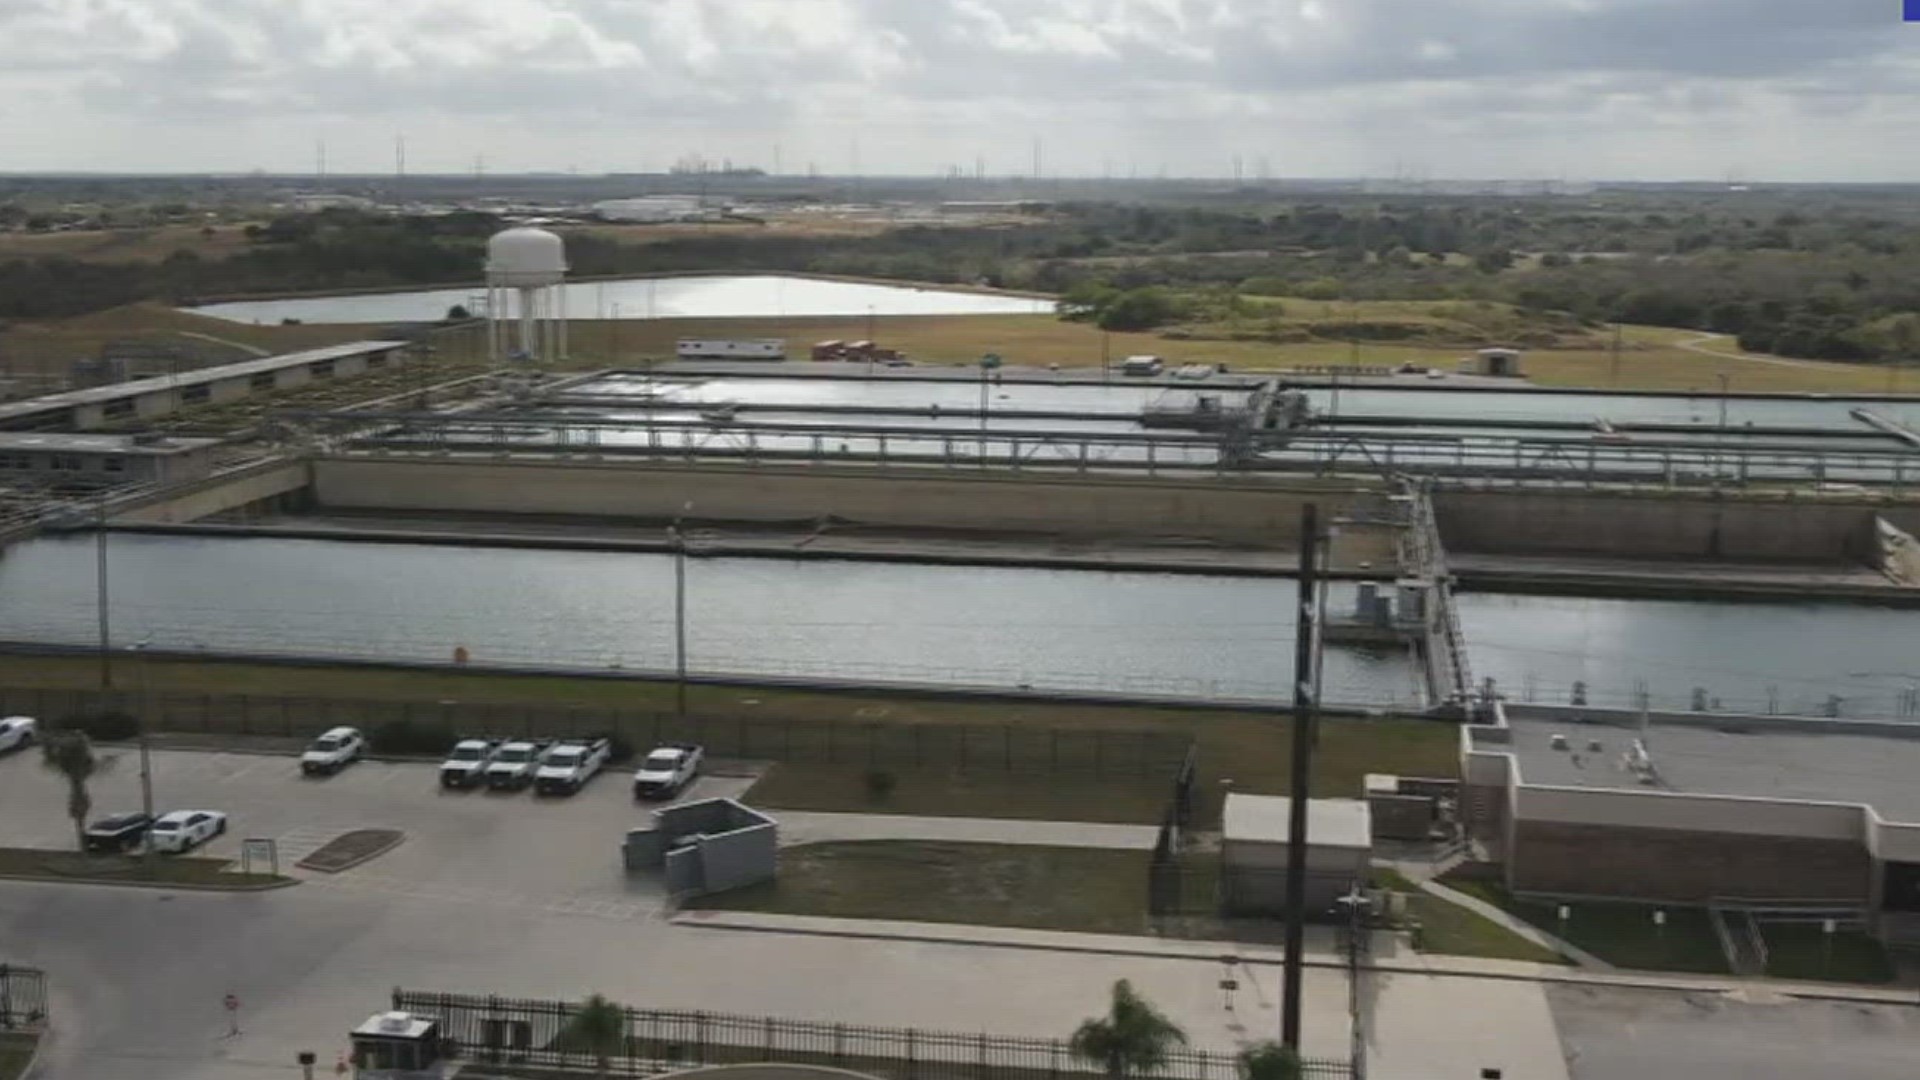 Currently, the city and port are looking at five possible options for a new water source.